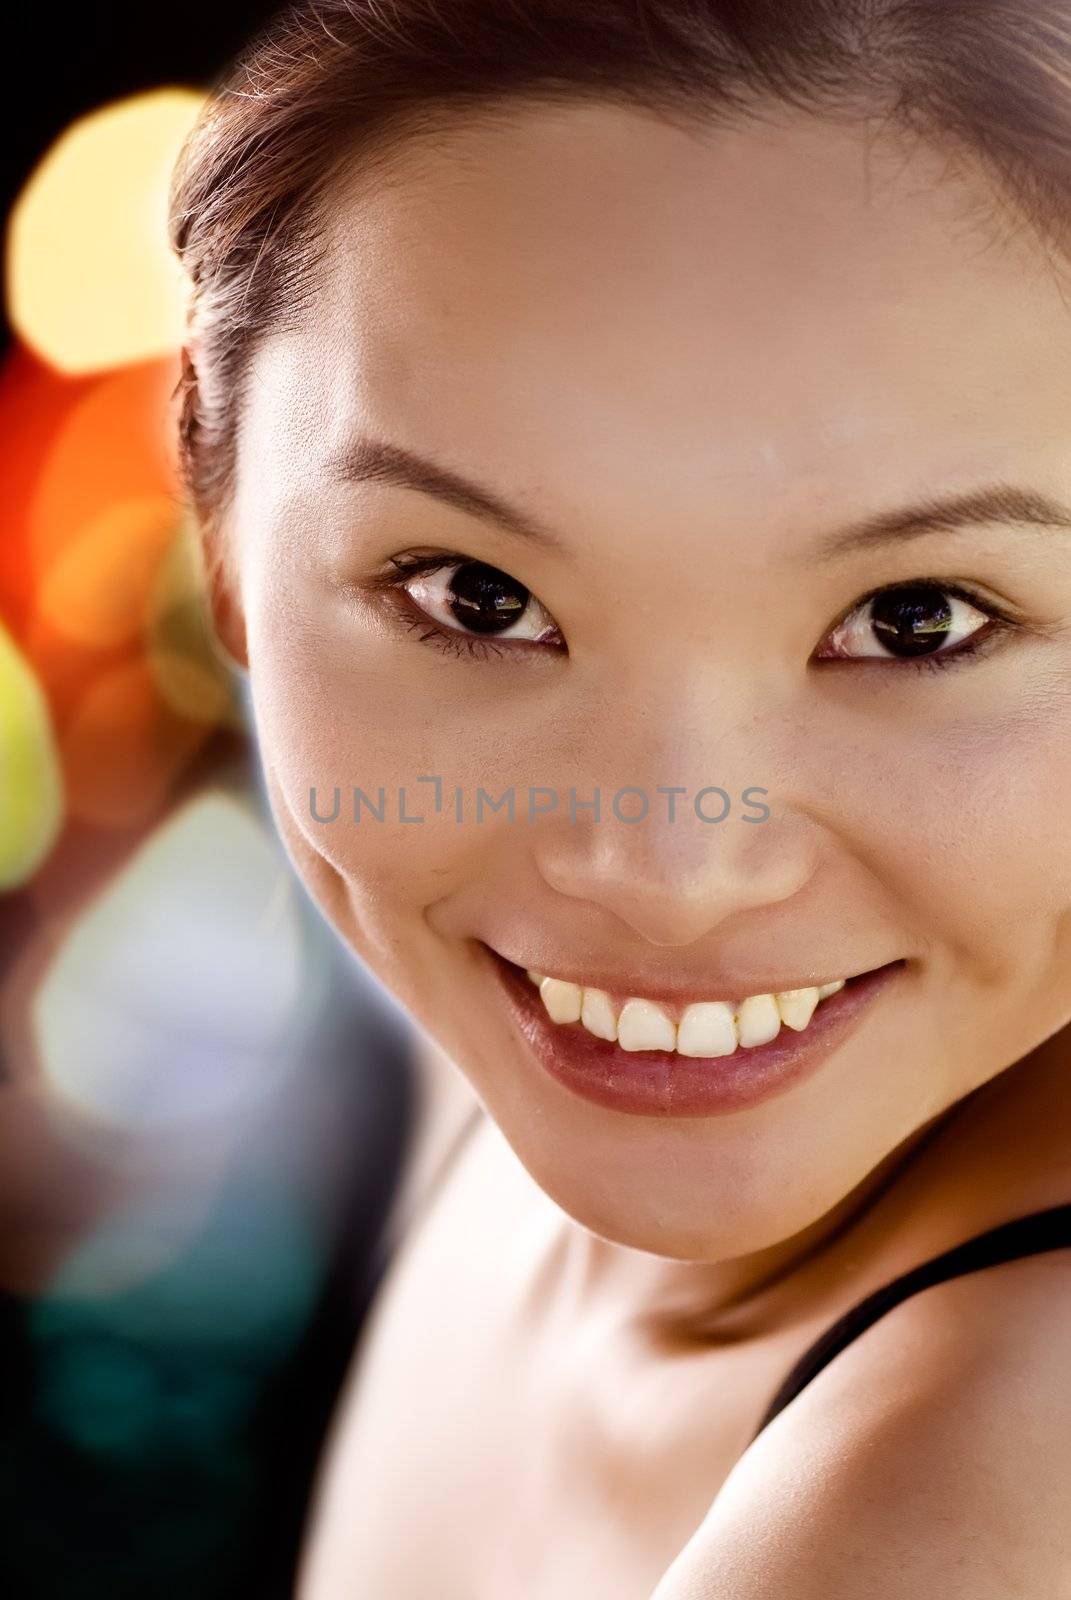 It is a portrait of sexy eastern young lady smiling